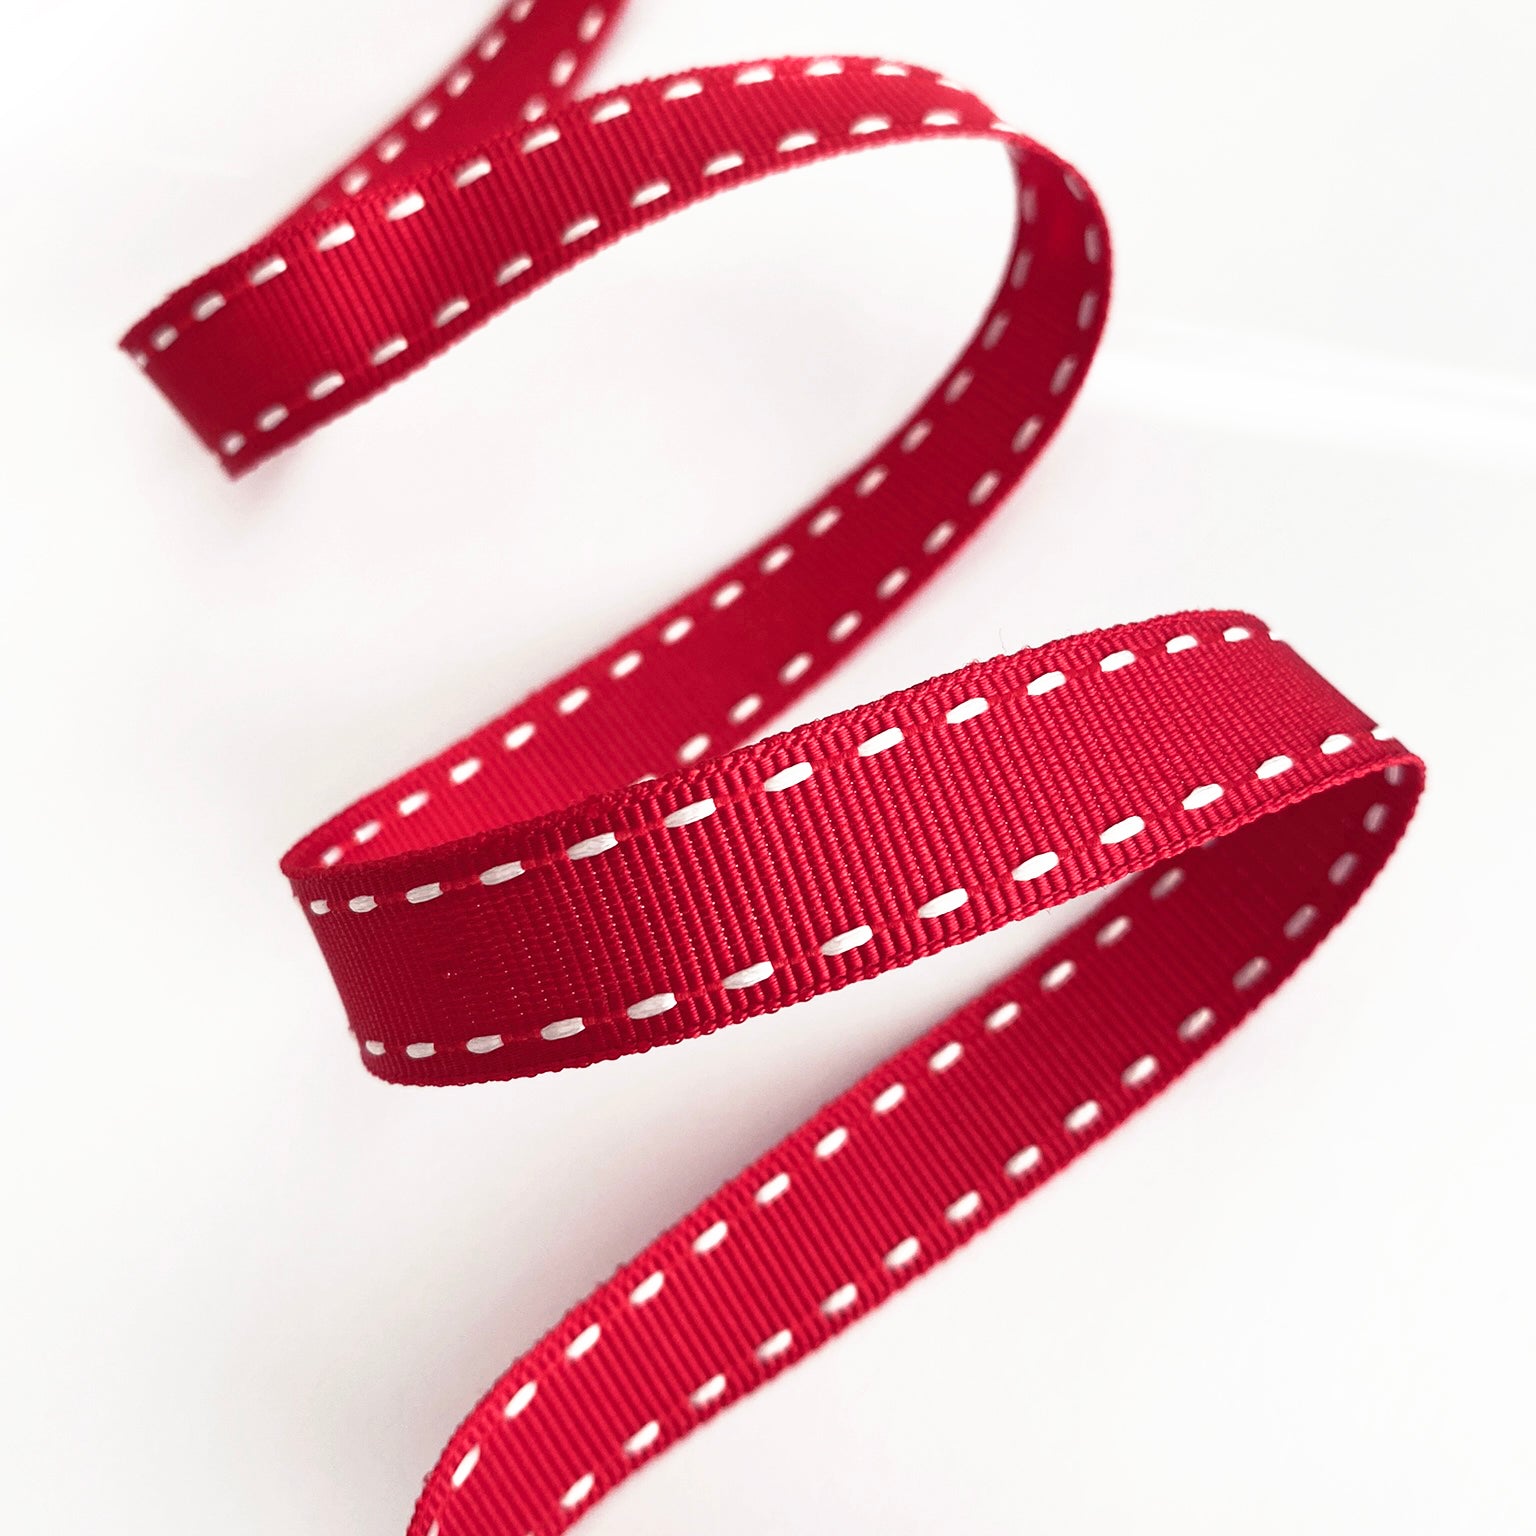 Stitch Ribbon | Red & White Grosgrain | 15mm Wrapping Craft | 1m or Full 15m Roll - SweetpeaStore